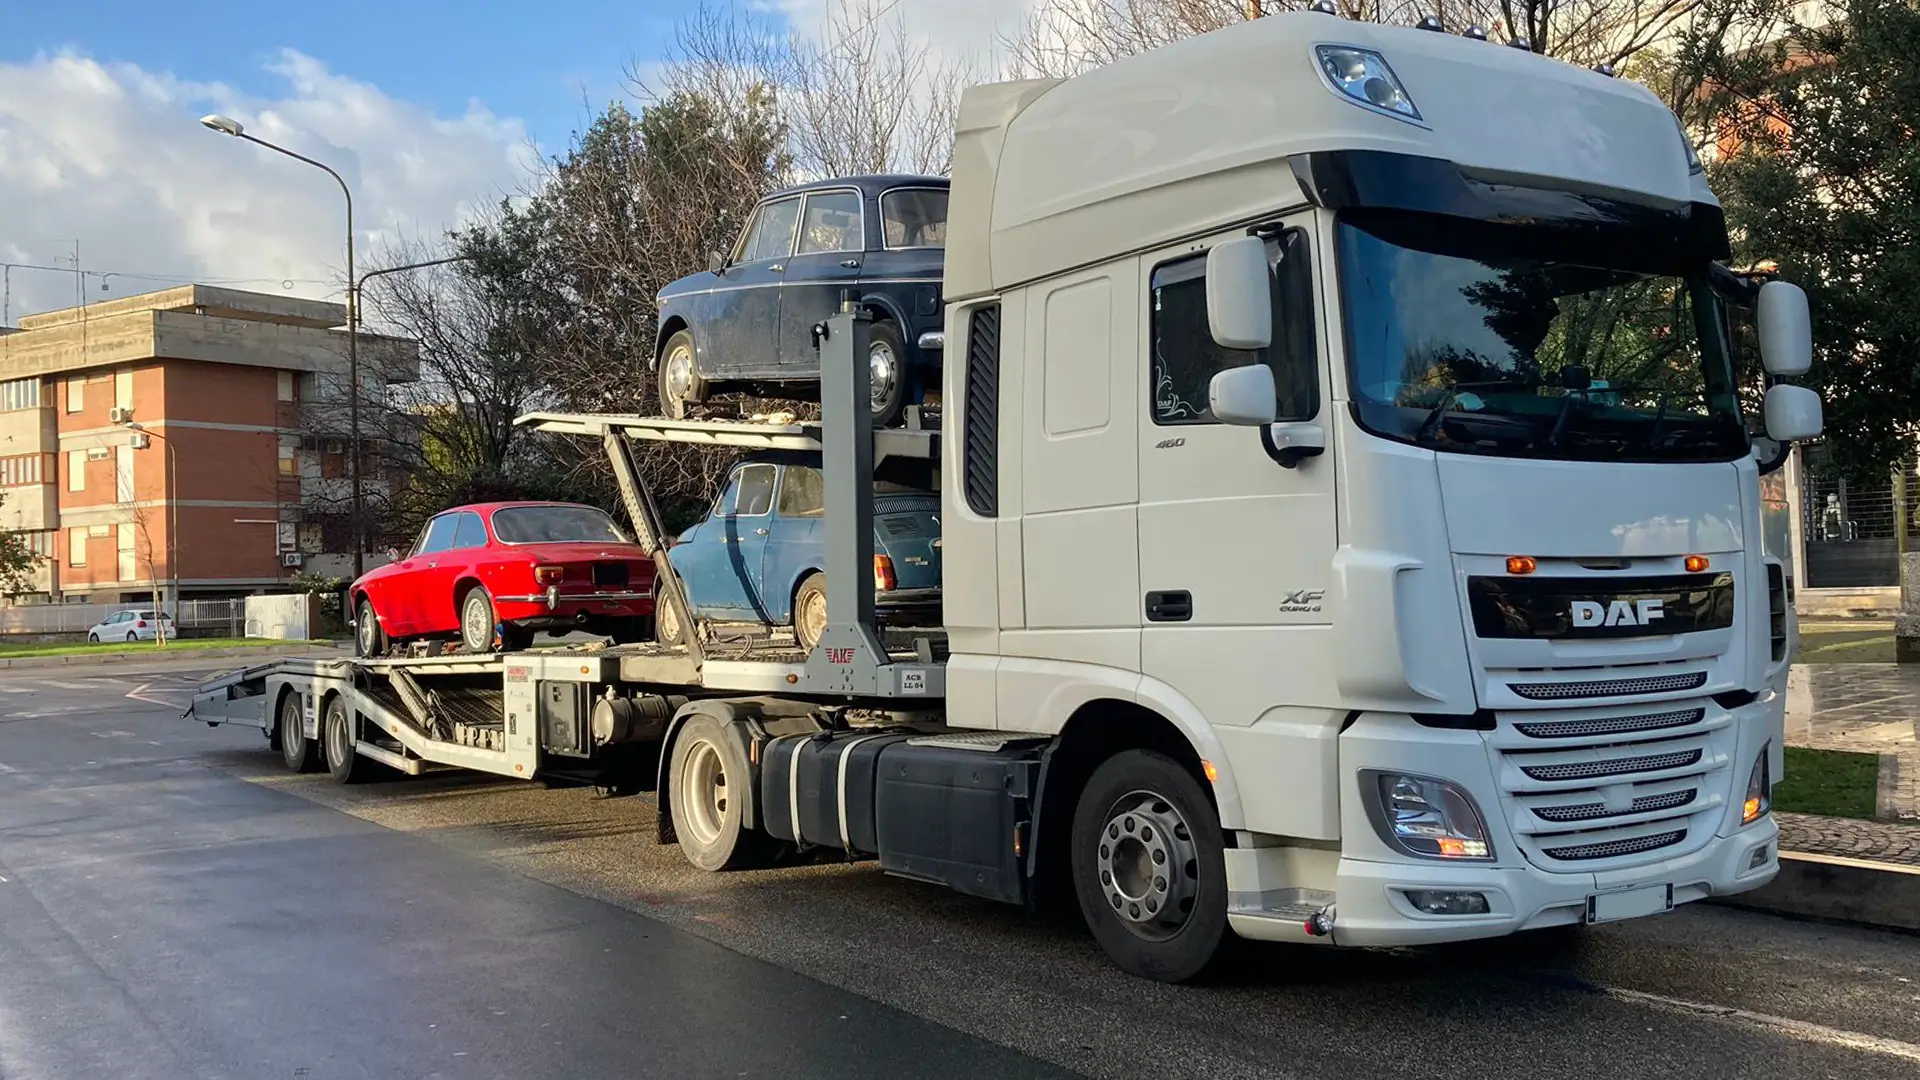 Car Transport Company in the UK